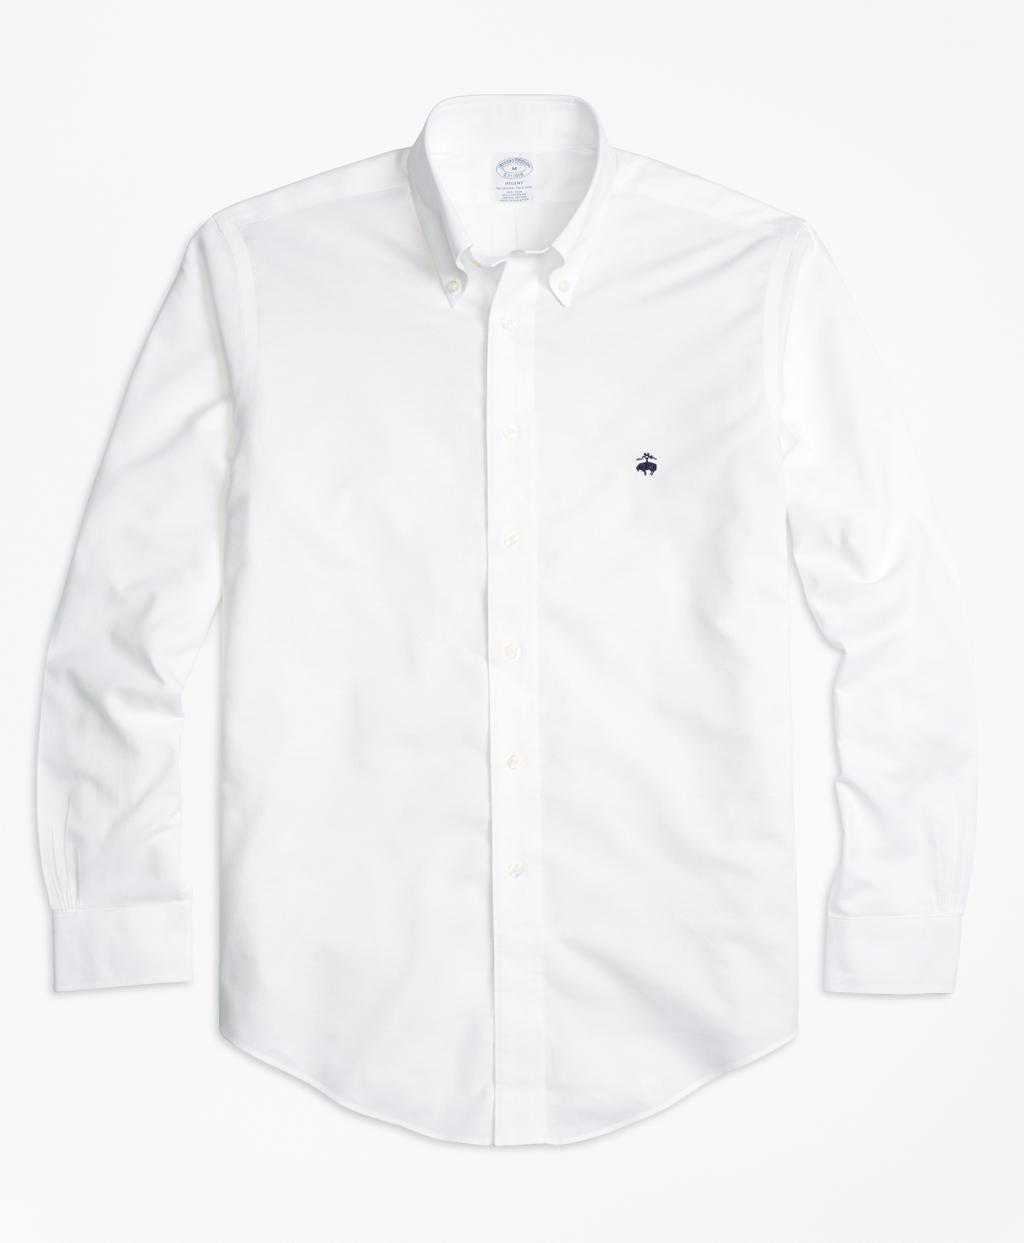 Lyst - Brooks Brothers Non-iron Regent Fit Oxford Sport Shirt in White ...